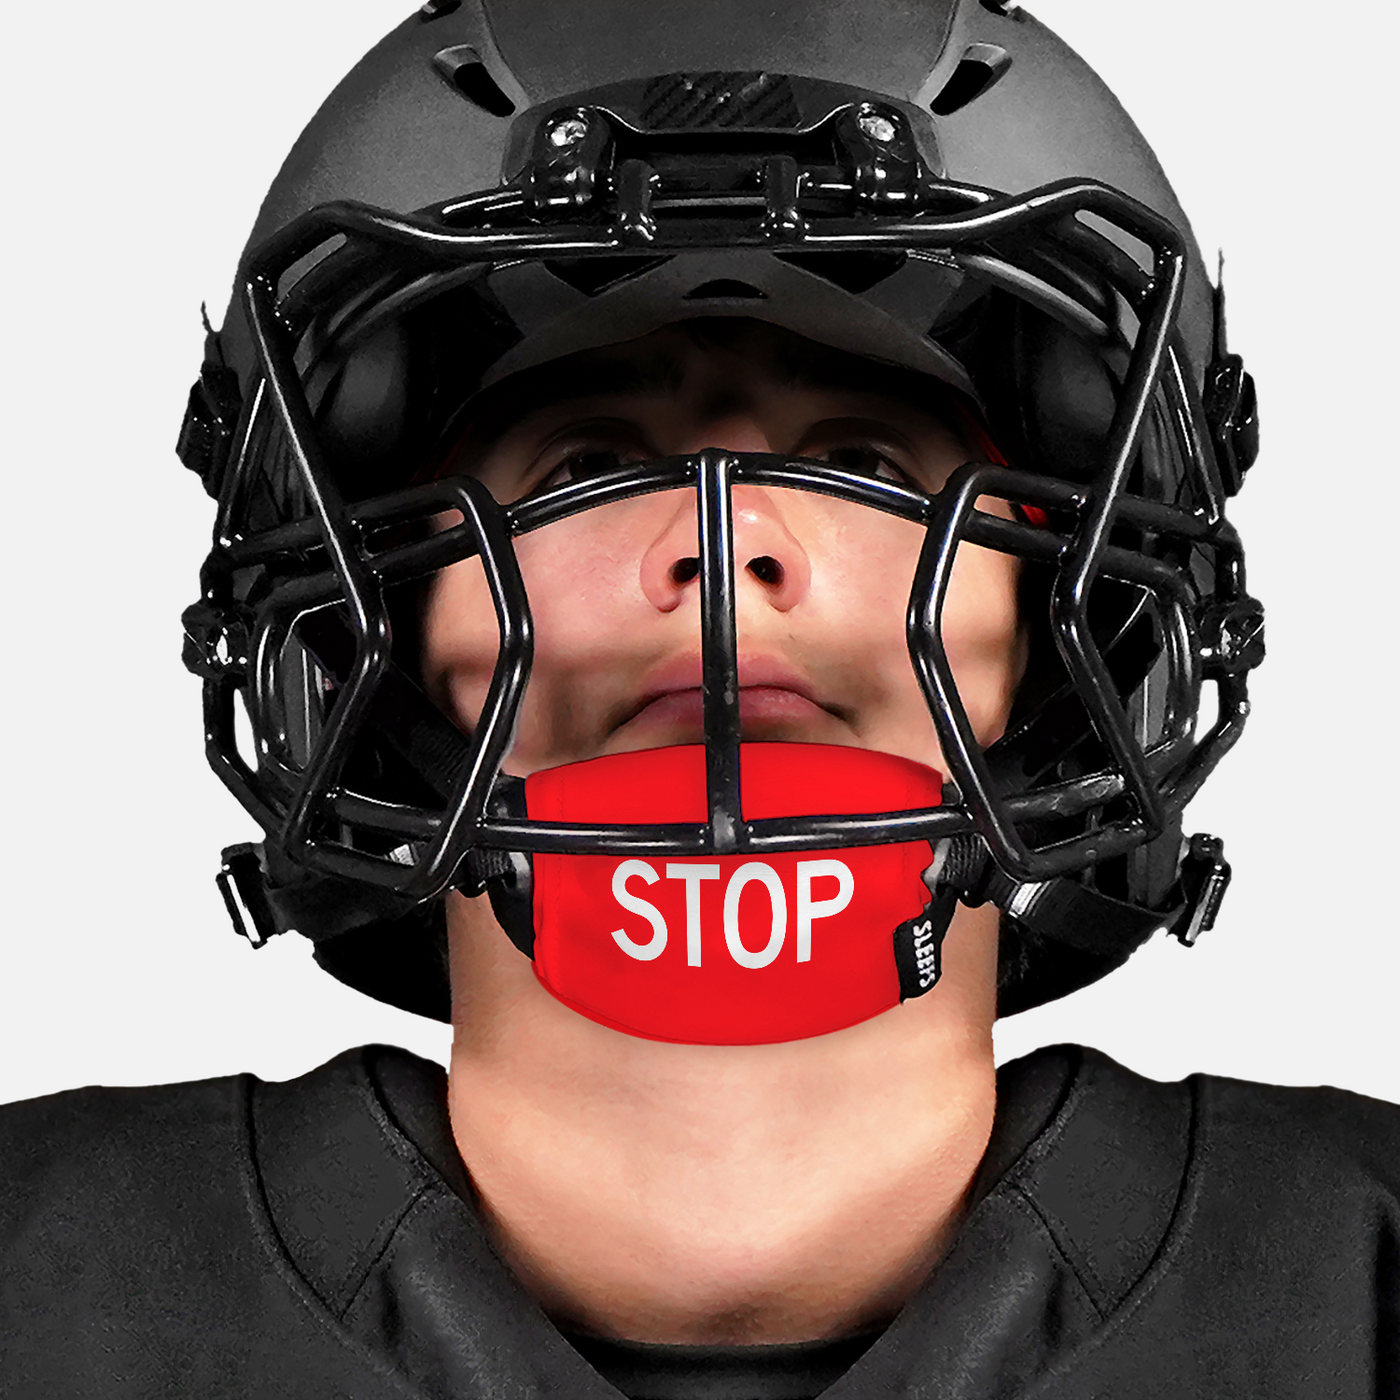 STOP Chin Strap Cover